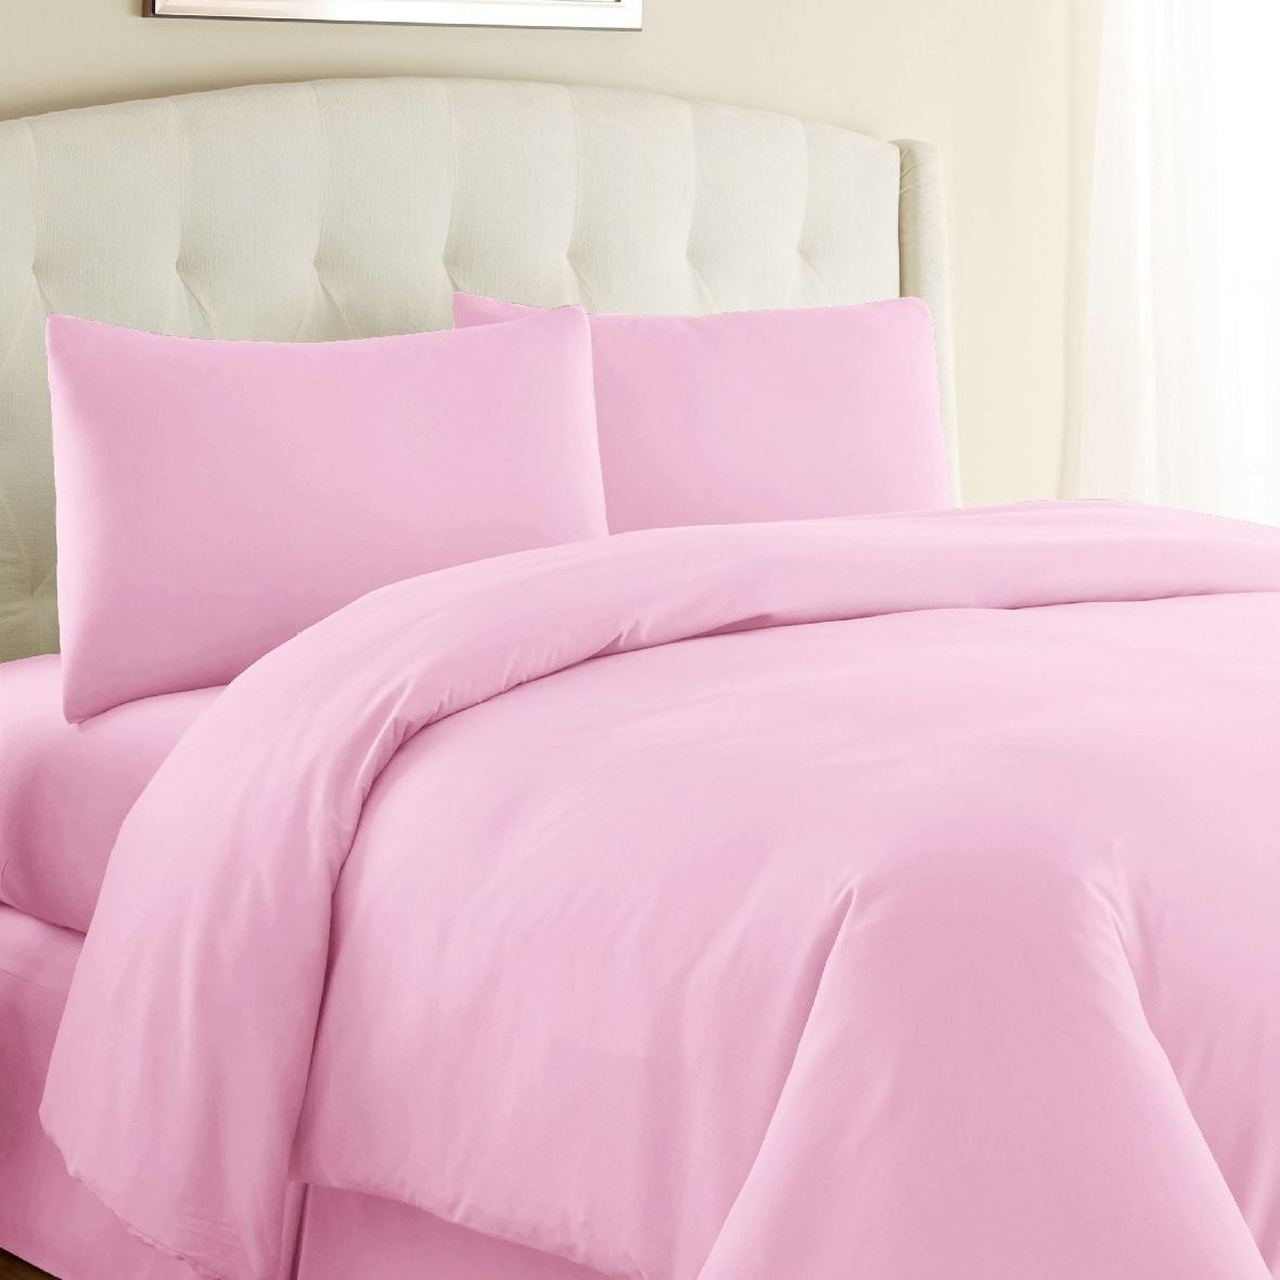 Baby Pink Duvet Cover With 4 Pillows, Pastel Pink Duvet Cover